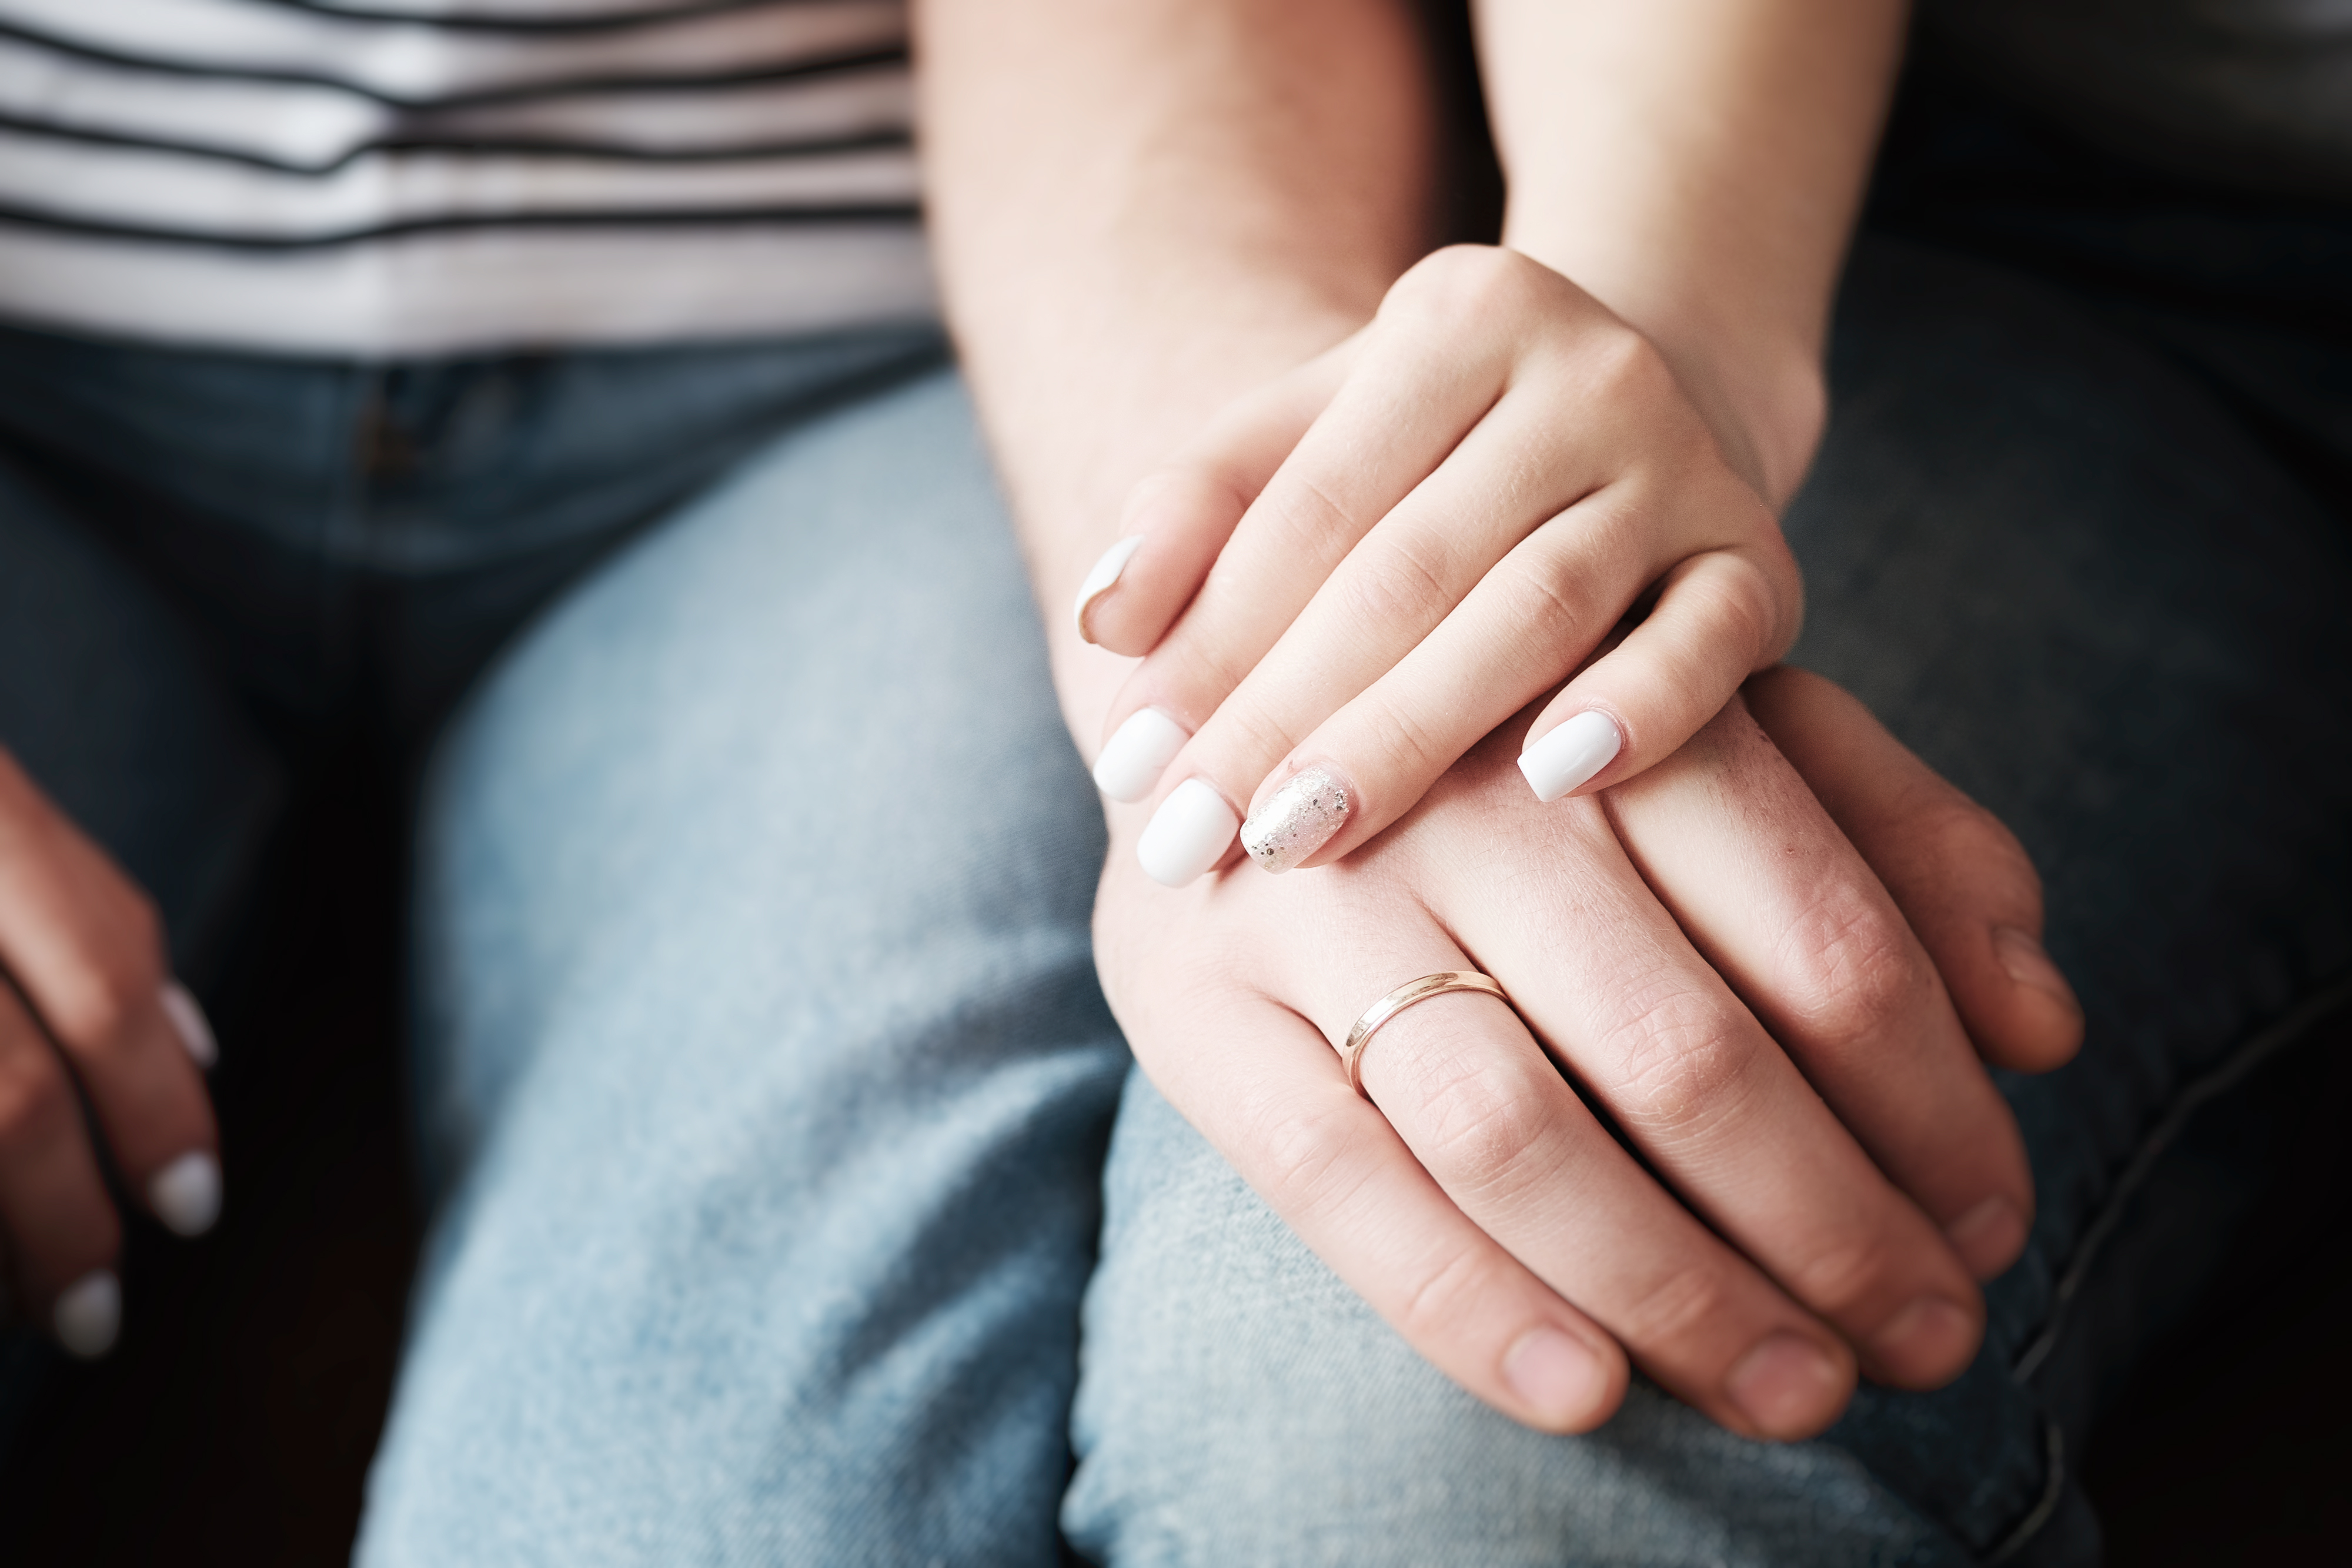 Couple holding hands as a sign of comfort and support | Source: Shutterstock